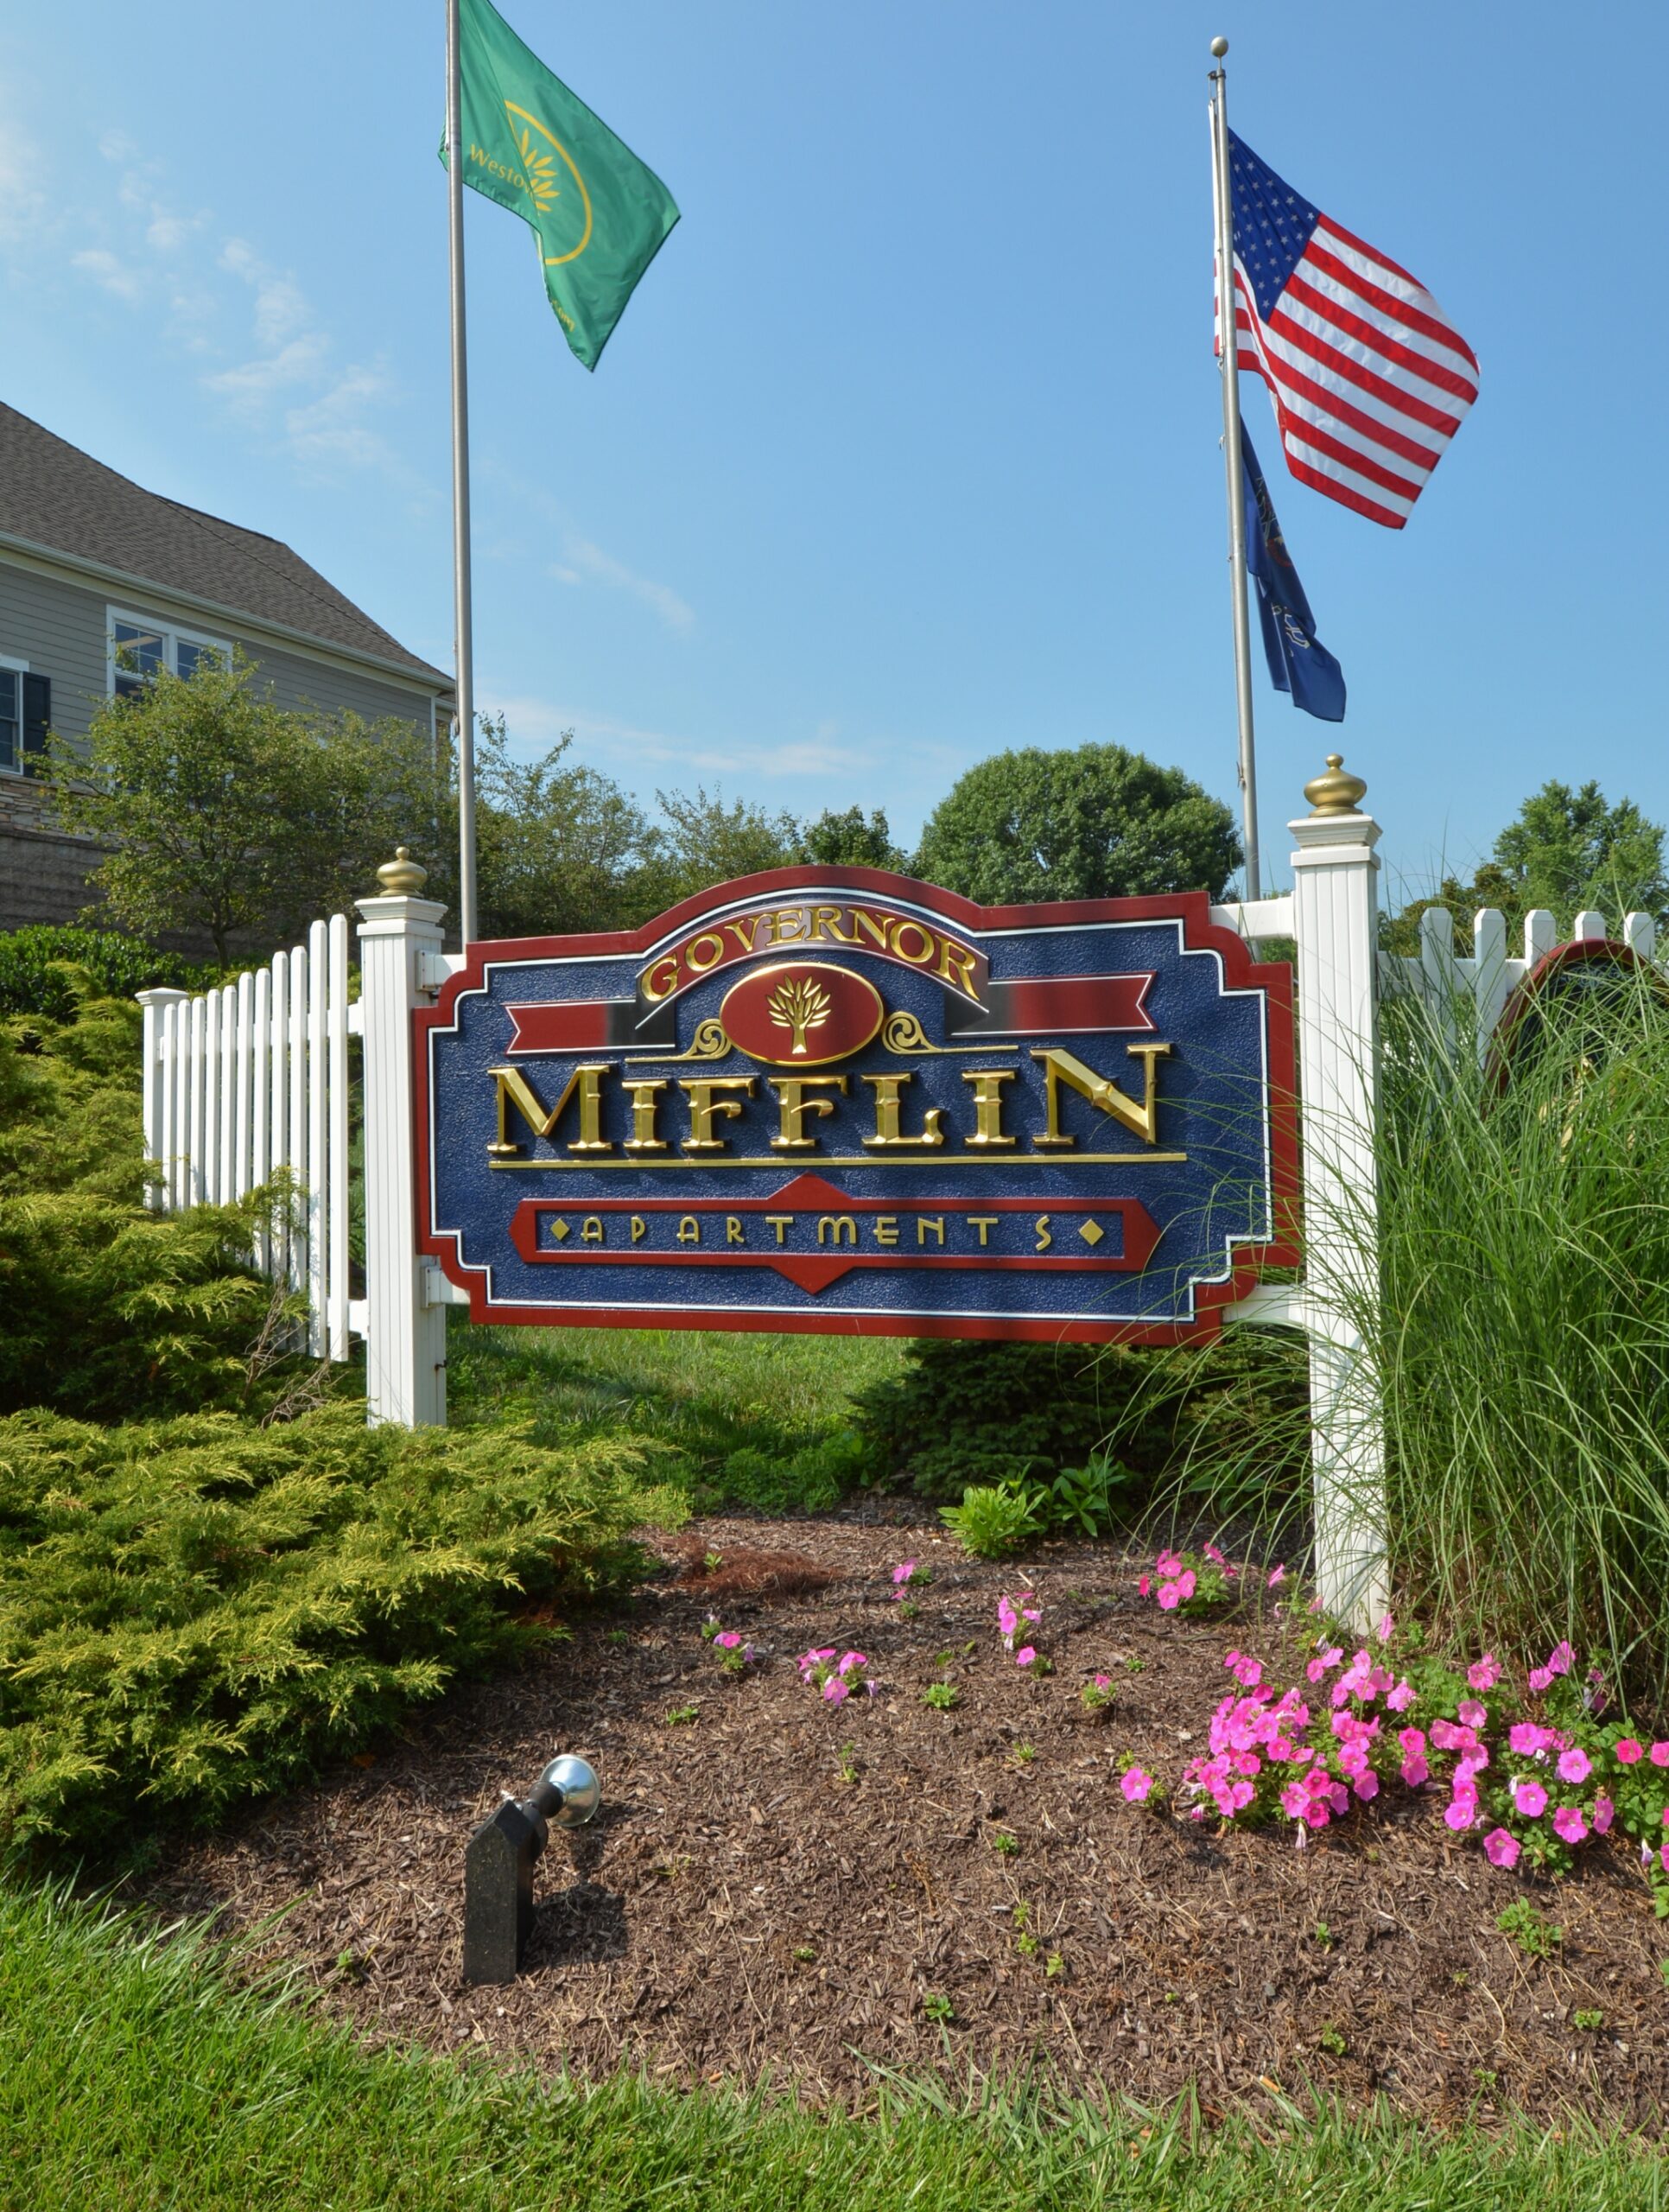 Blue and red Governor Mifflin Apartments property sign surrounded by flowers and flags